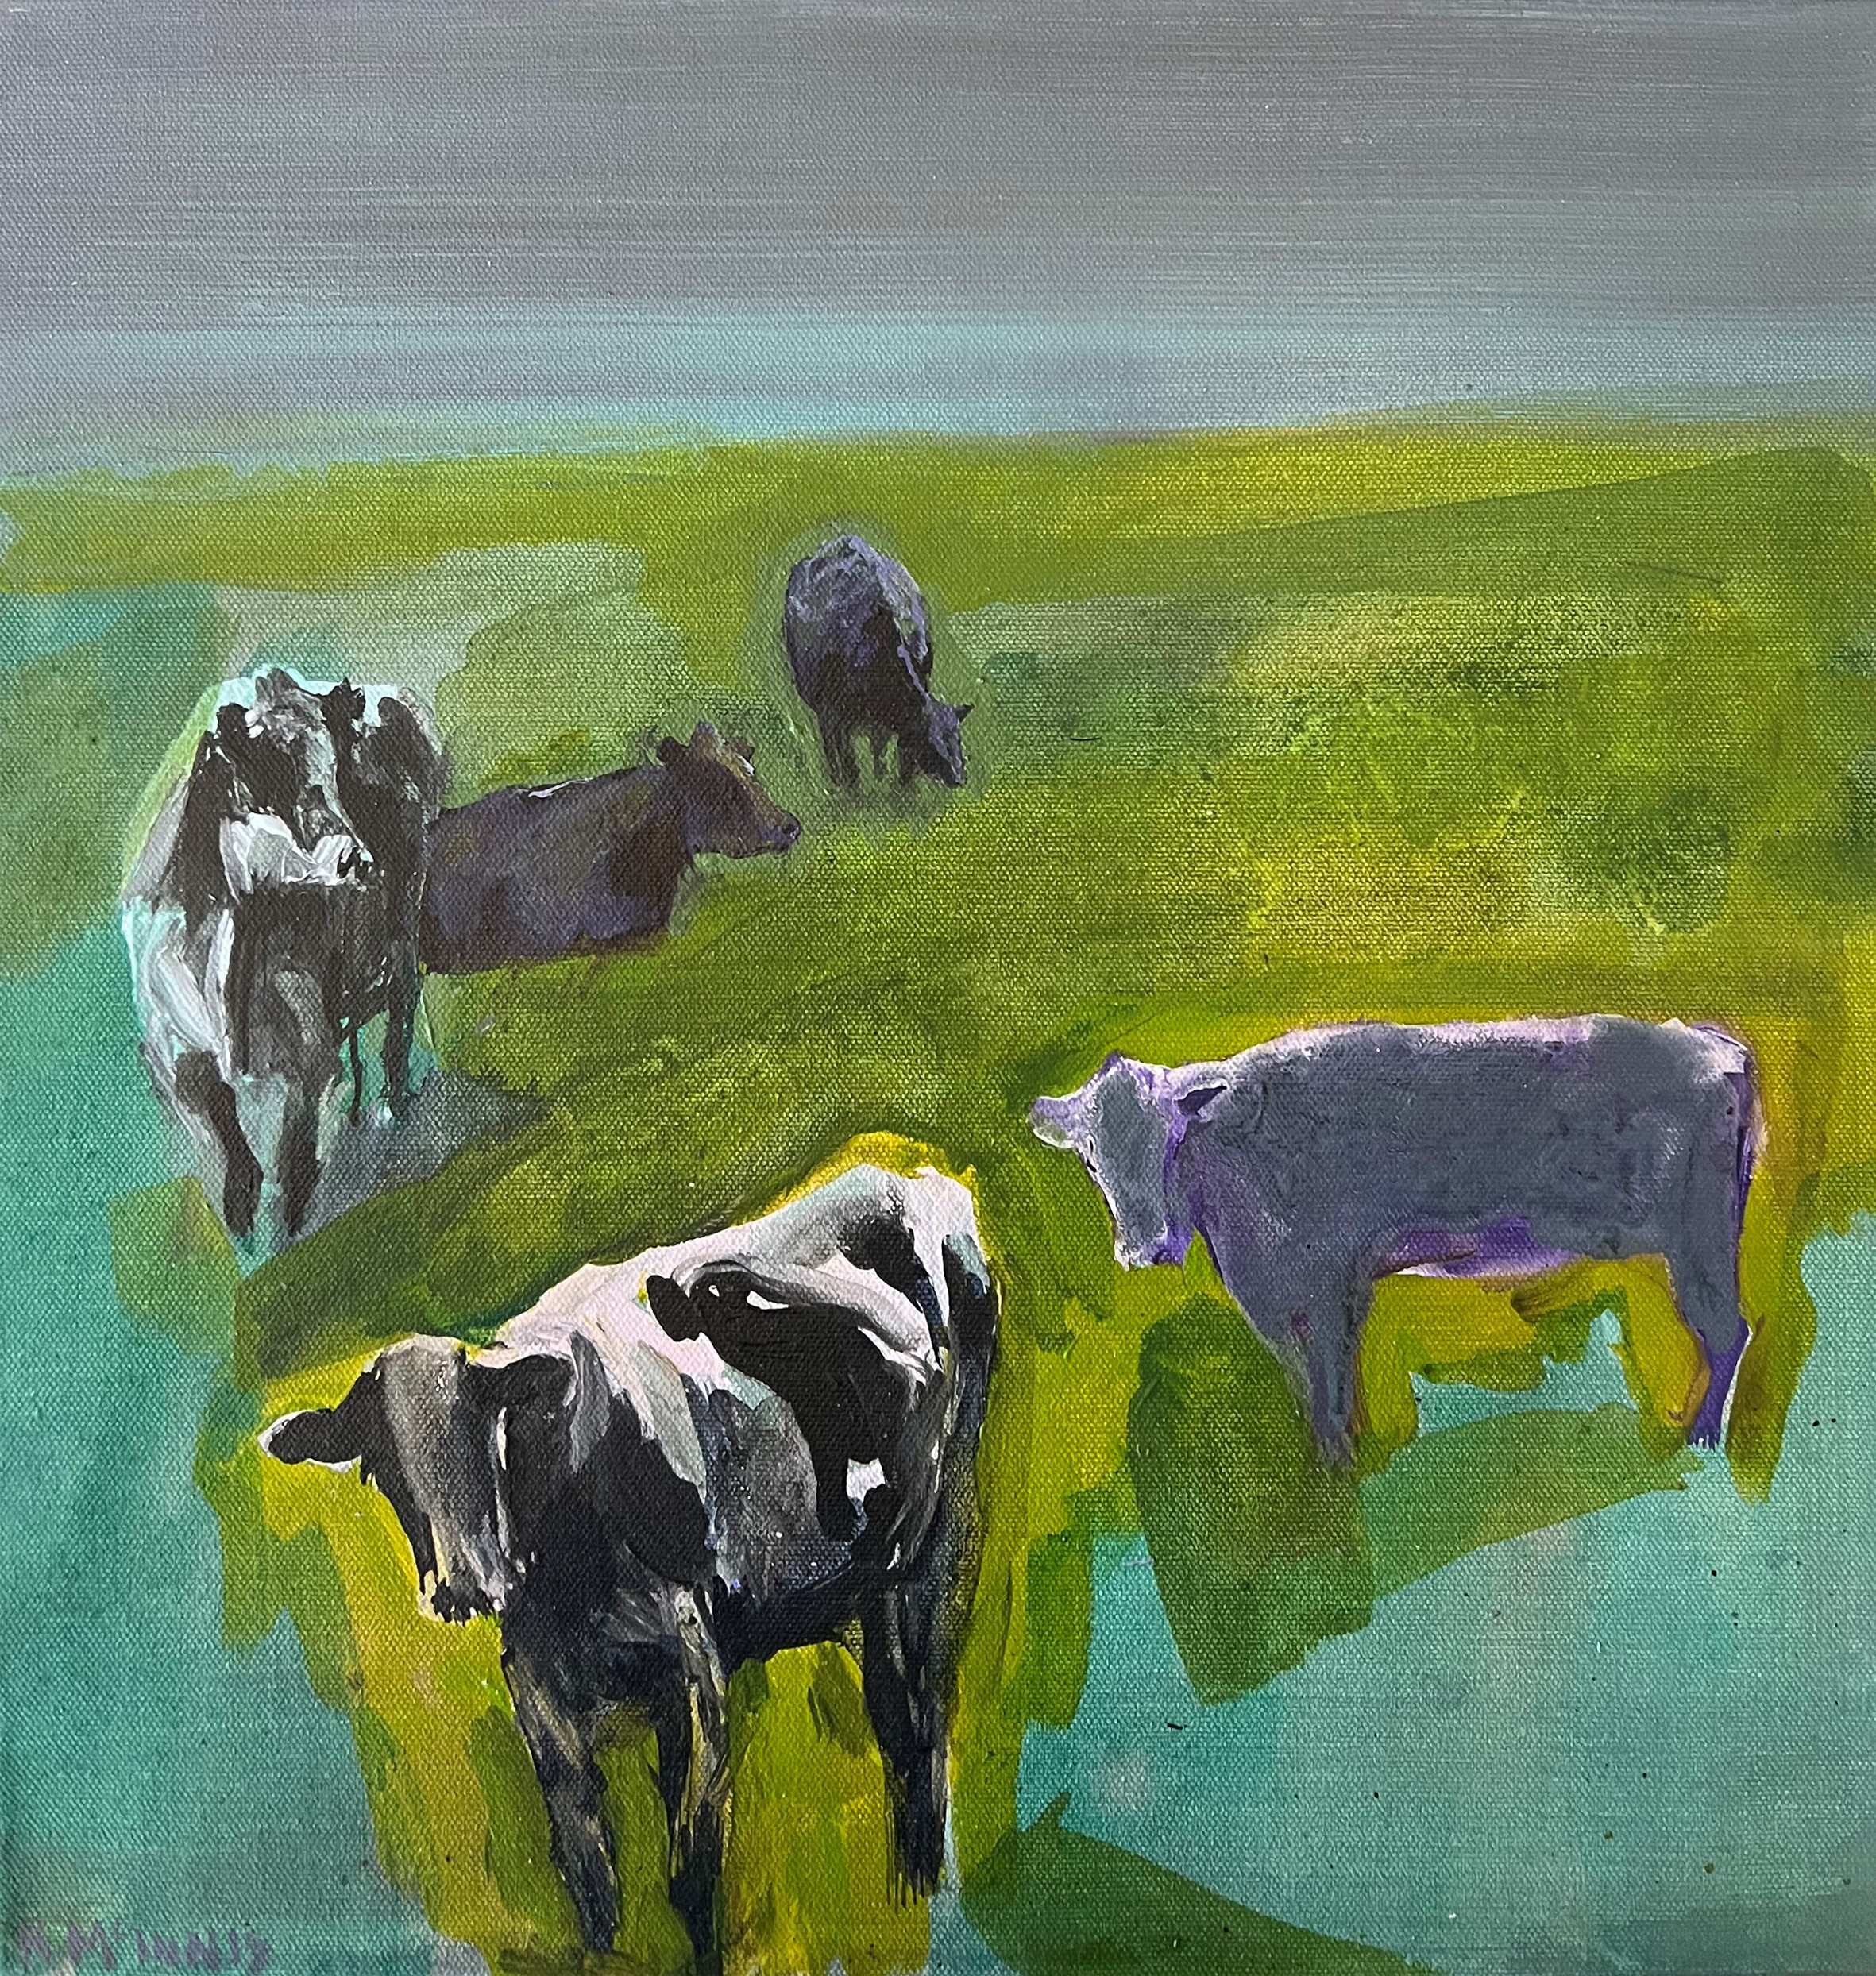 Kerry McInnis 'Prom Cows' oil and oil stick on canvas 40 x 40cm $3,000